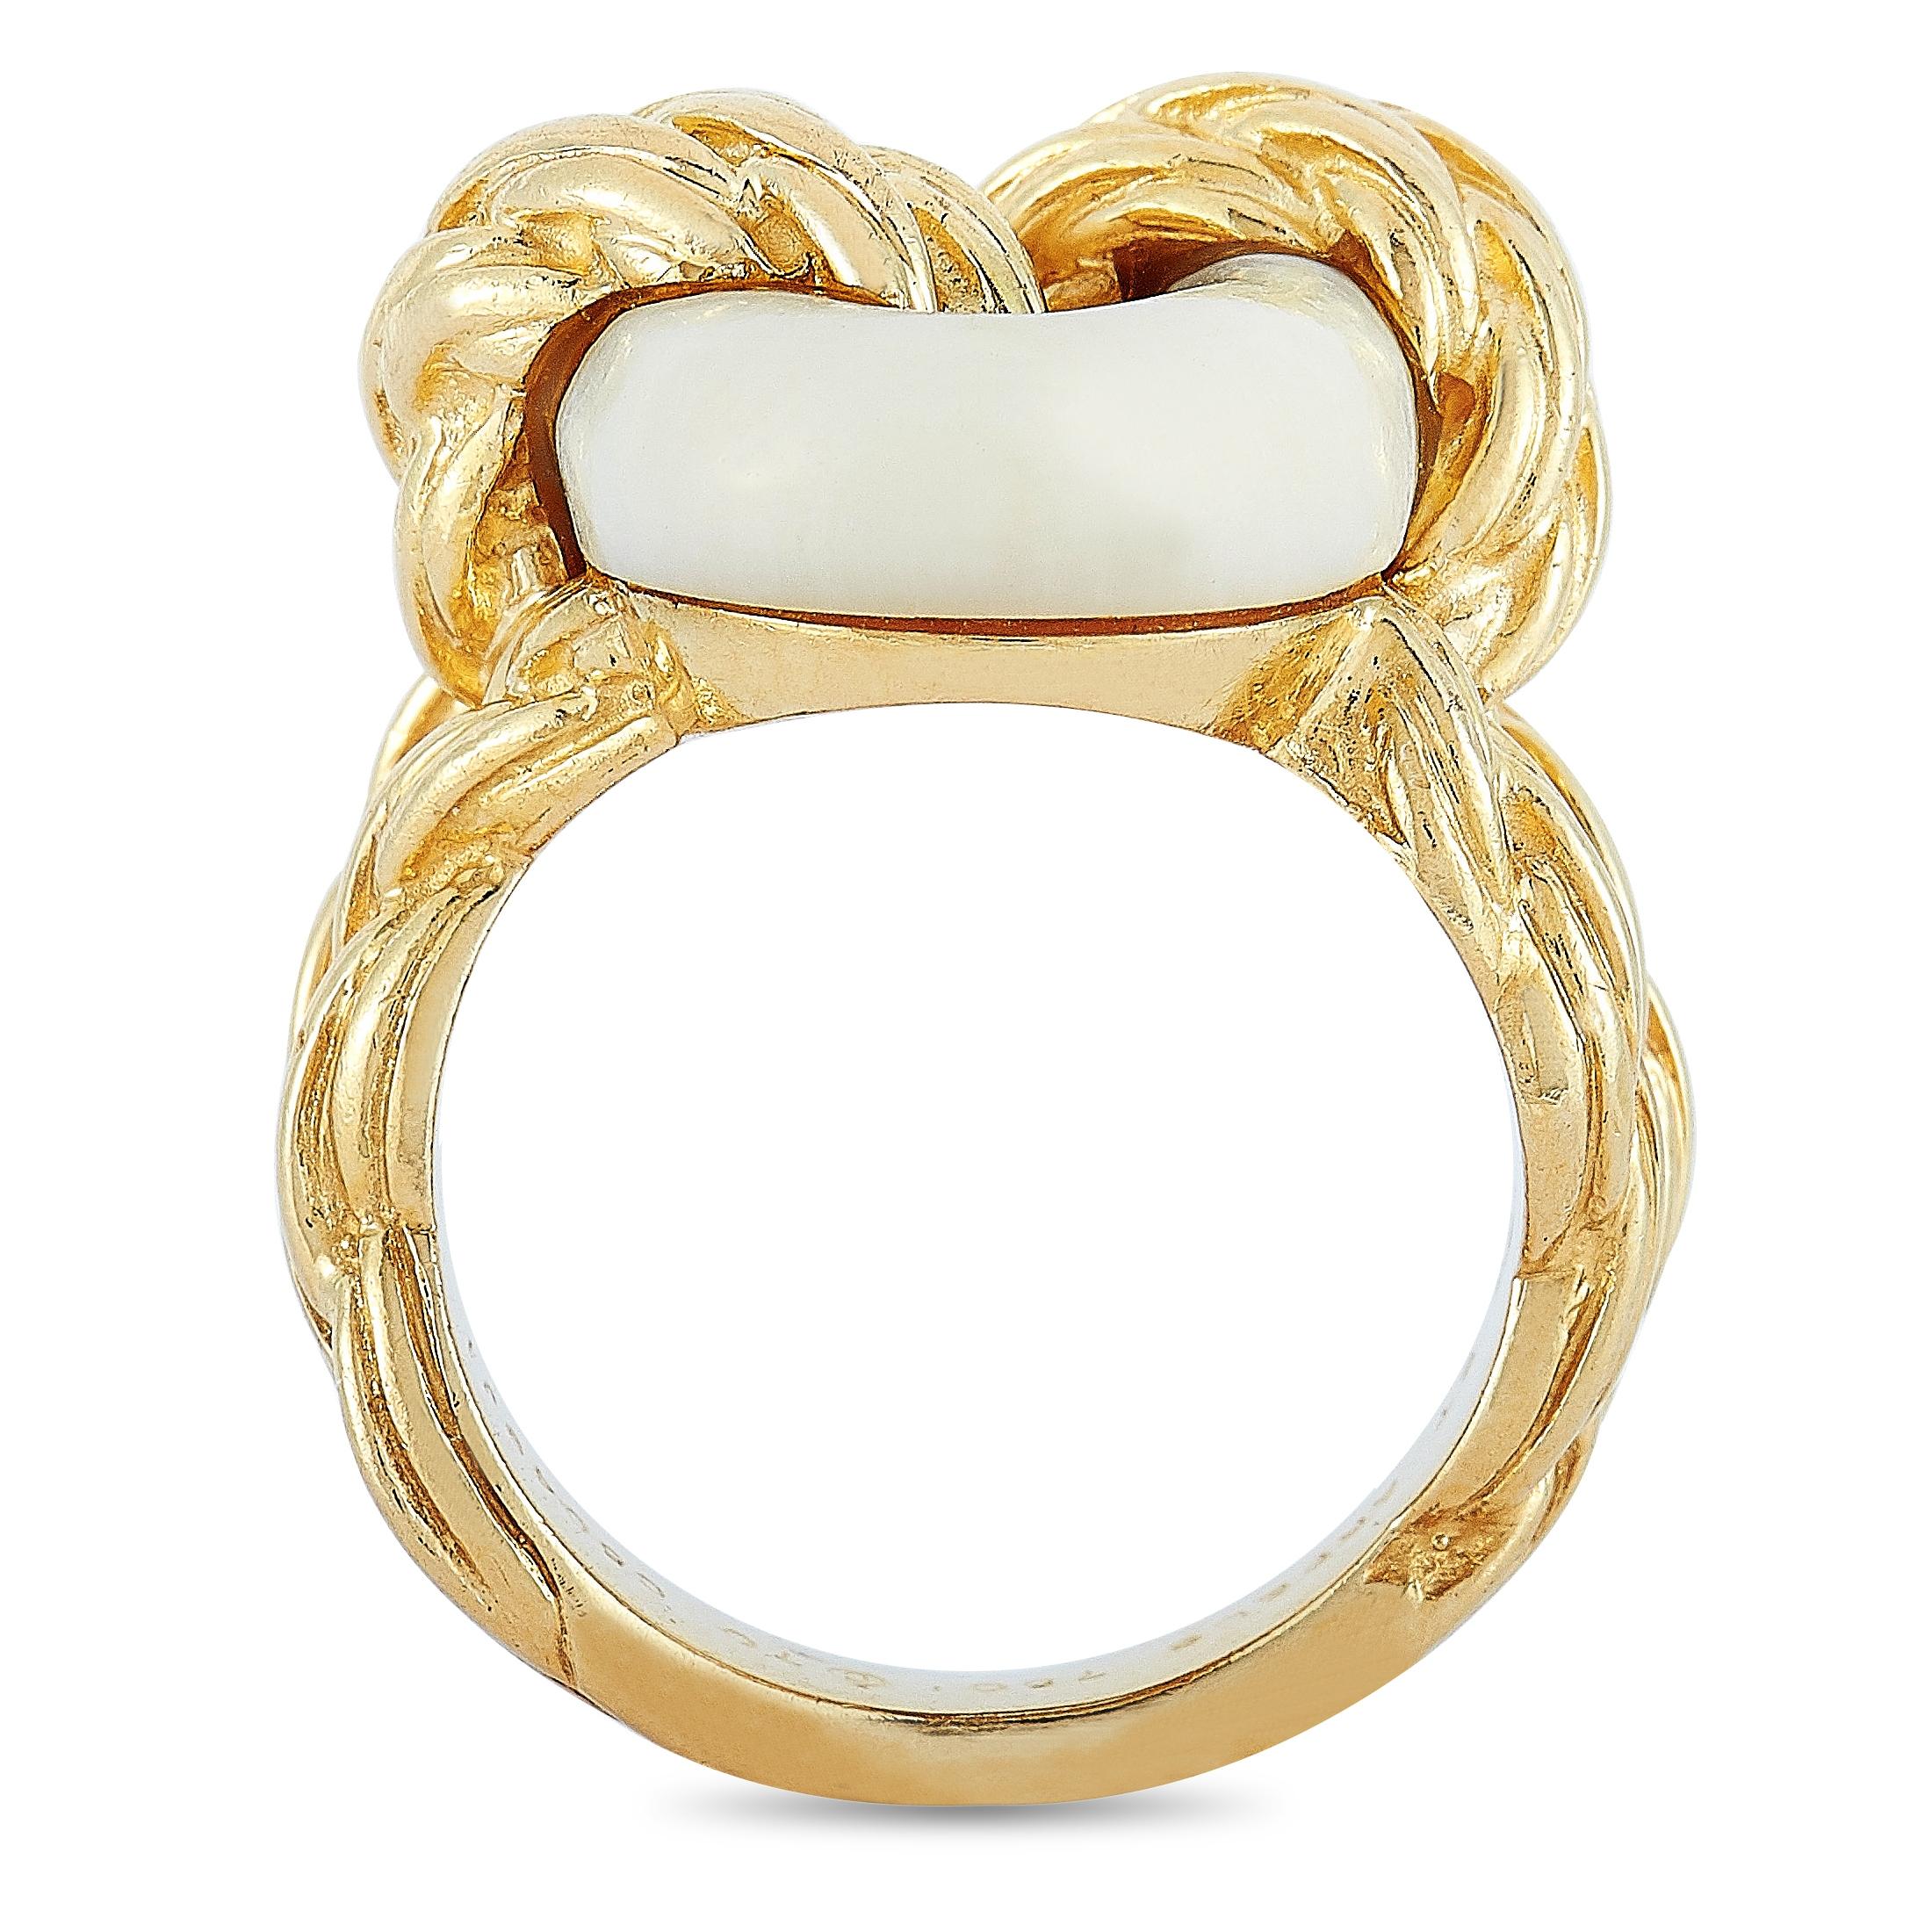 This vintage Van Cleef & Arpels ring is made out of 18K yellow gold and coral and weighs 14.5 grams. The ring boasts band thickness of 4 mm and top height of 8 mm, while top dimensions measure 18 by 20 mm.
Ring Size: 5